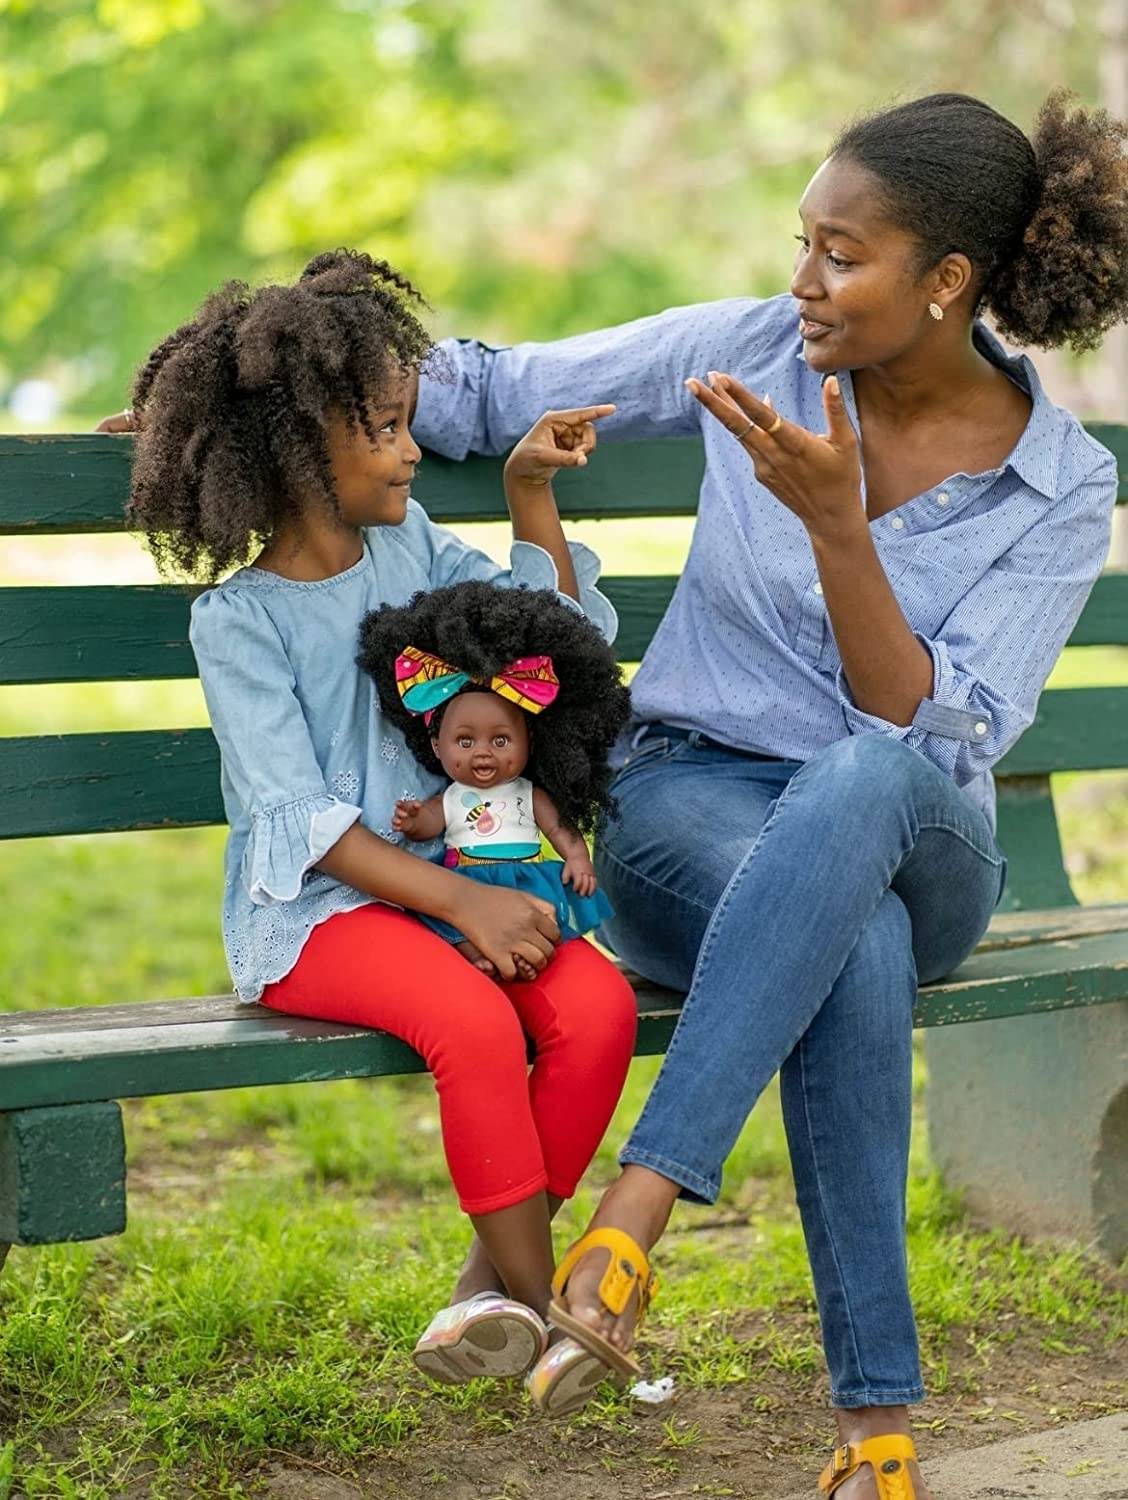 A parent and child holding the doll with a curly fro